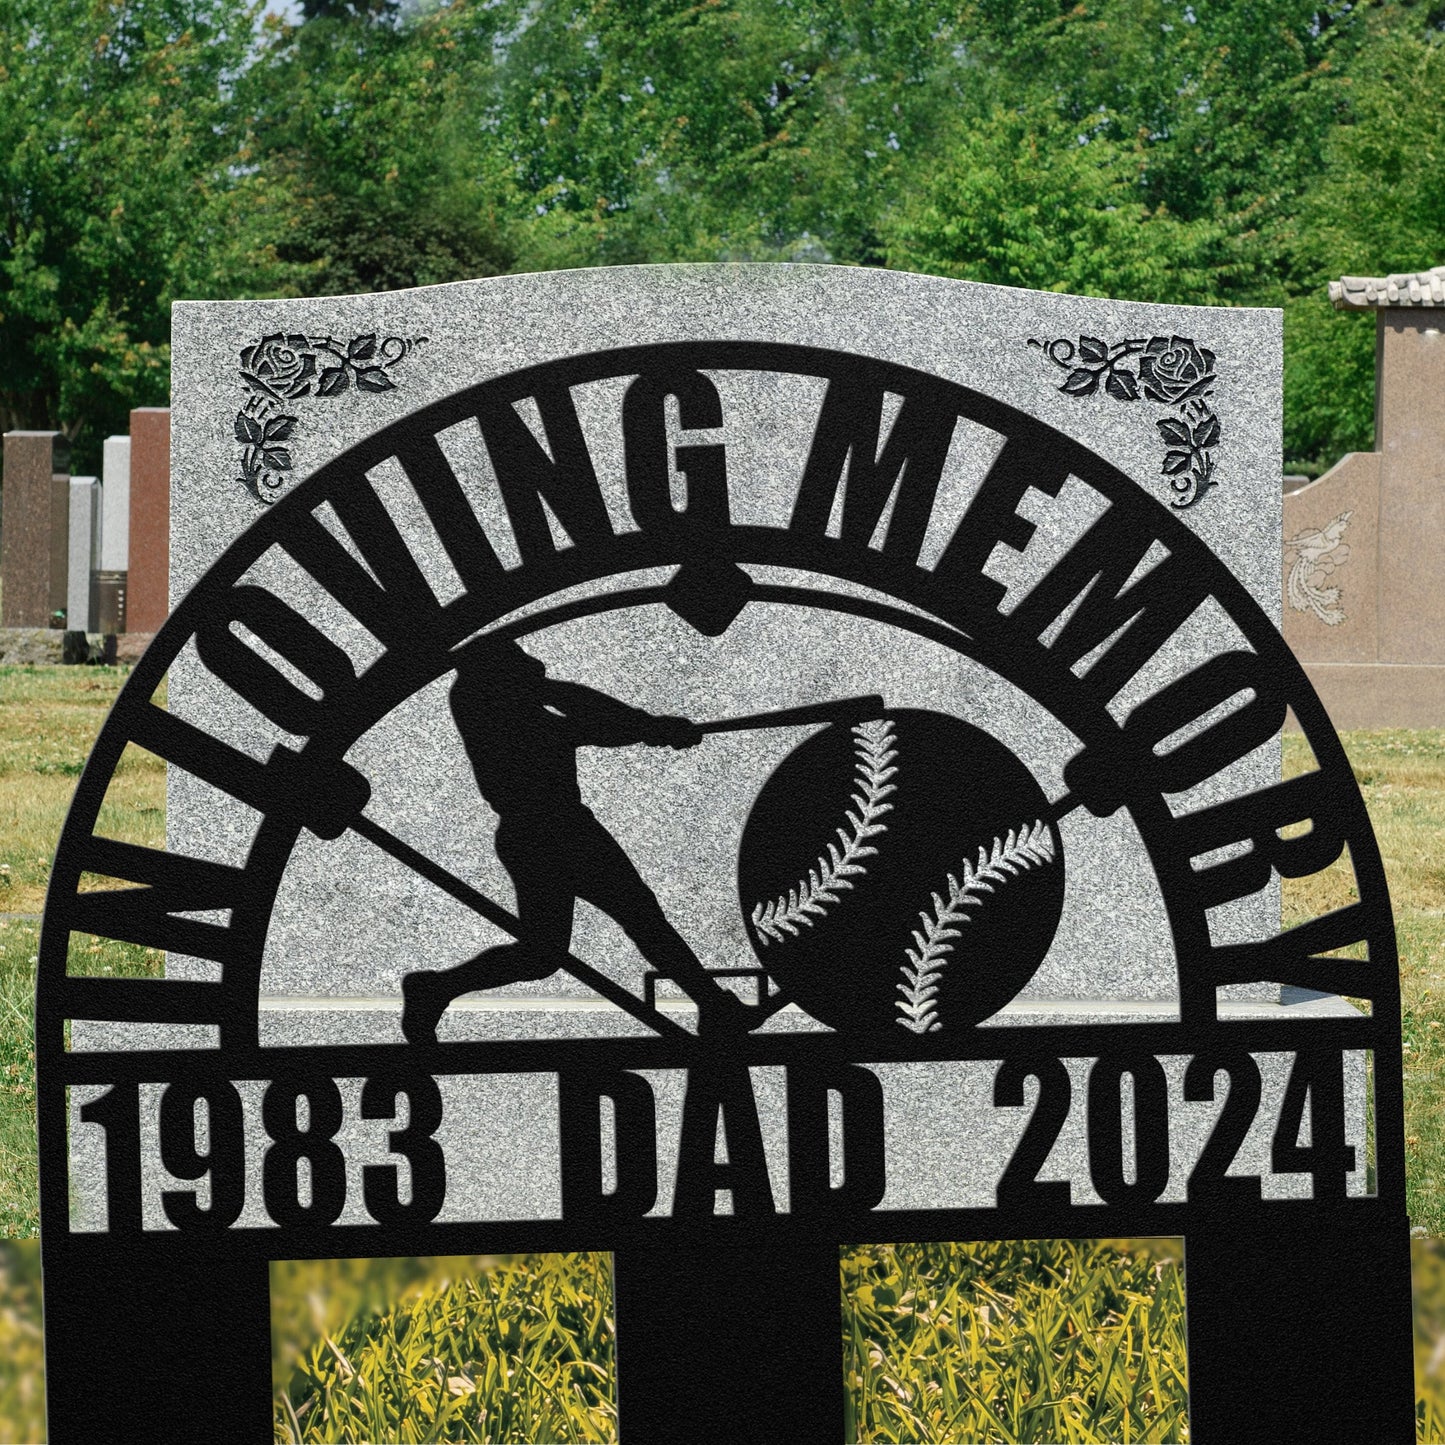 Legendary Baseball Memorial Gift - Personalized Sports Tribute Memorial Memory Metal Wall Sign or Temporary Grave Marker Men's Remembrance